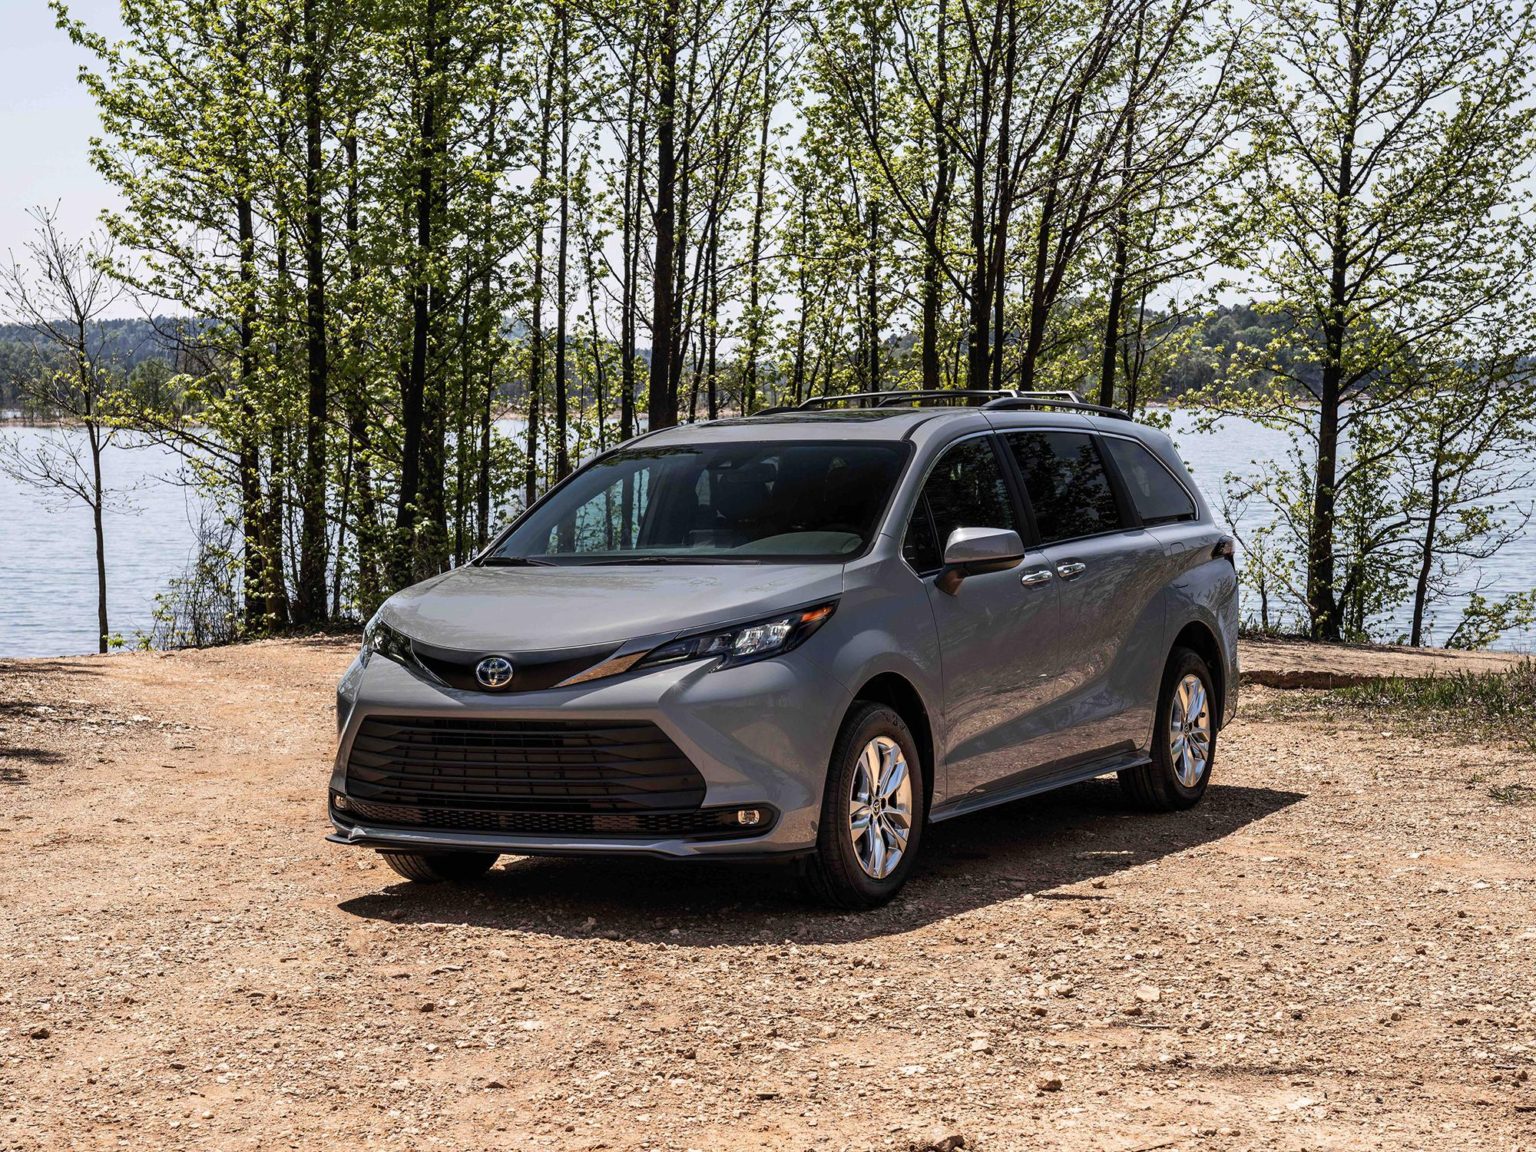 Toyota has given its all-wheel drive minivan some off-road prowess, but not much.